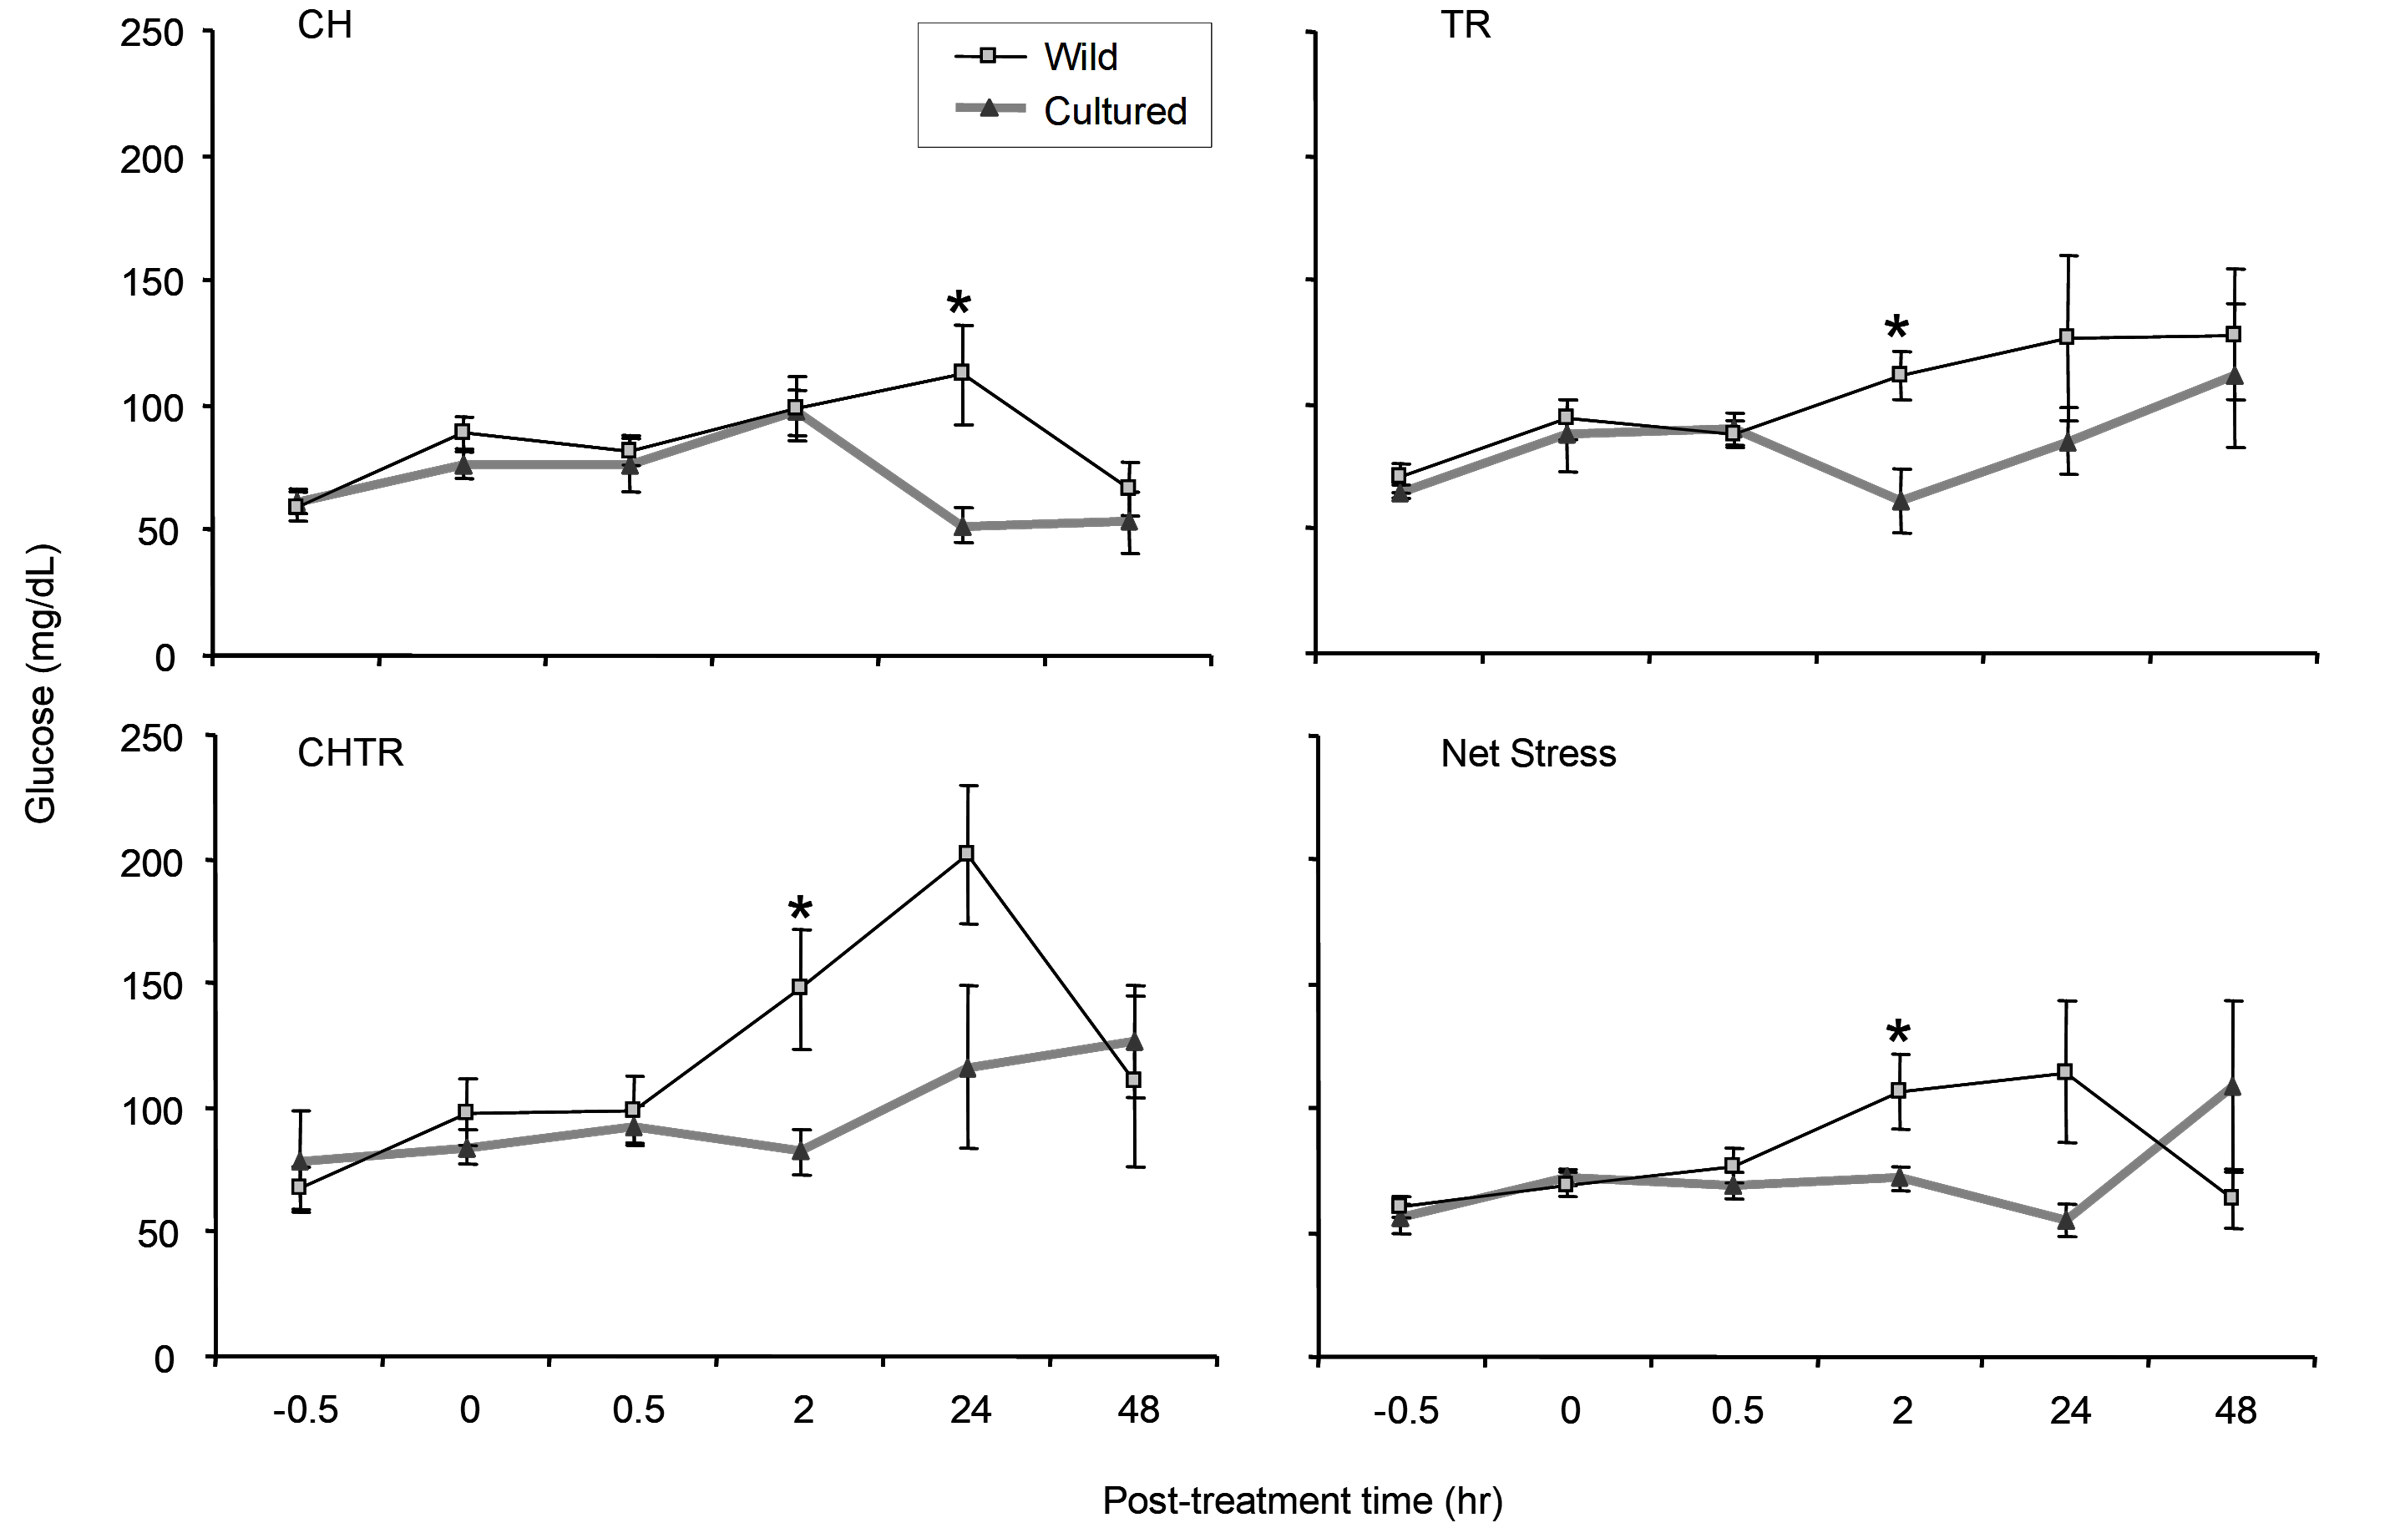 Four graphs. X axis in all graphs is post-treatment time ranging from -0.5 to 48 hours. Y axis in all graphs is Glucose levels ranging from 0 to 250 mg/dL. Mean glucose levels in wild Delta Smelt  post-treatment in all experiments was generally higher at every measurement than mean glucose levels in cultured Delta Smelt. Significant difference in mean glucose levels between wild and cultured Delta Smelt are seen in the CH experiment at the 24 hour interval; in the TR experiment at the 2 hour interval; in the CHTR experiment at the 2 hour interval; and in the Net Stress experiment at the 2 hour interval.